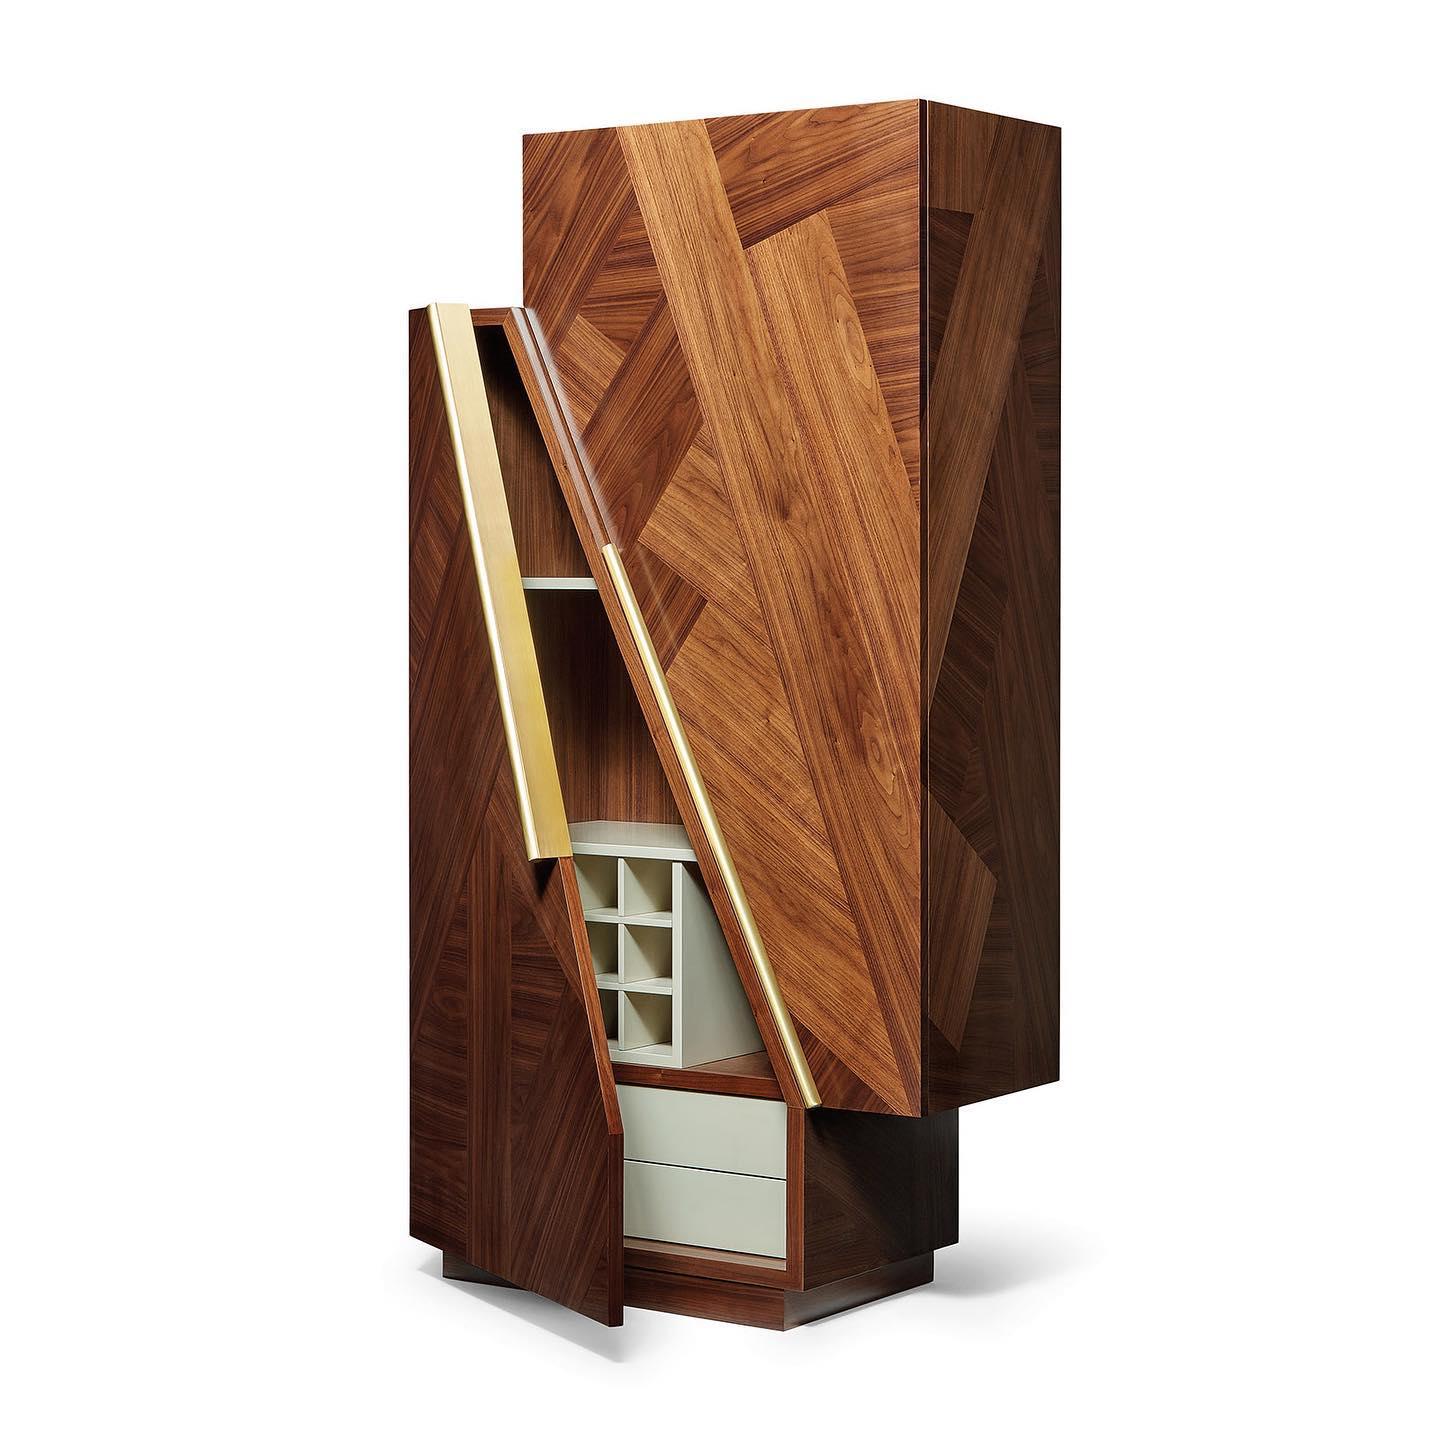 This bar Cabinet is a contemplation on the polarities in Nature. The wood marquetry is the framing device for two large doors, with an interior designed and made to hold glasses and bottles.
Body: American Walnut.
Drawers , shelves and wine rack :